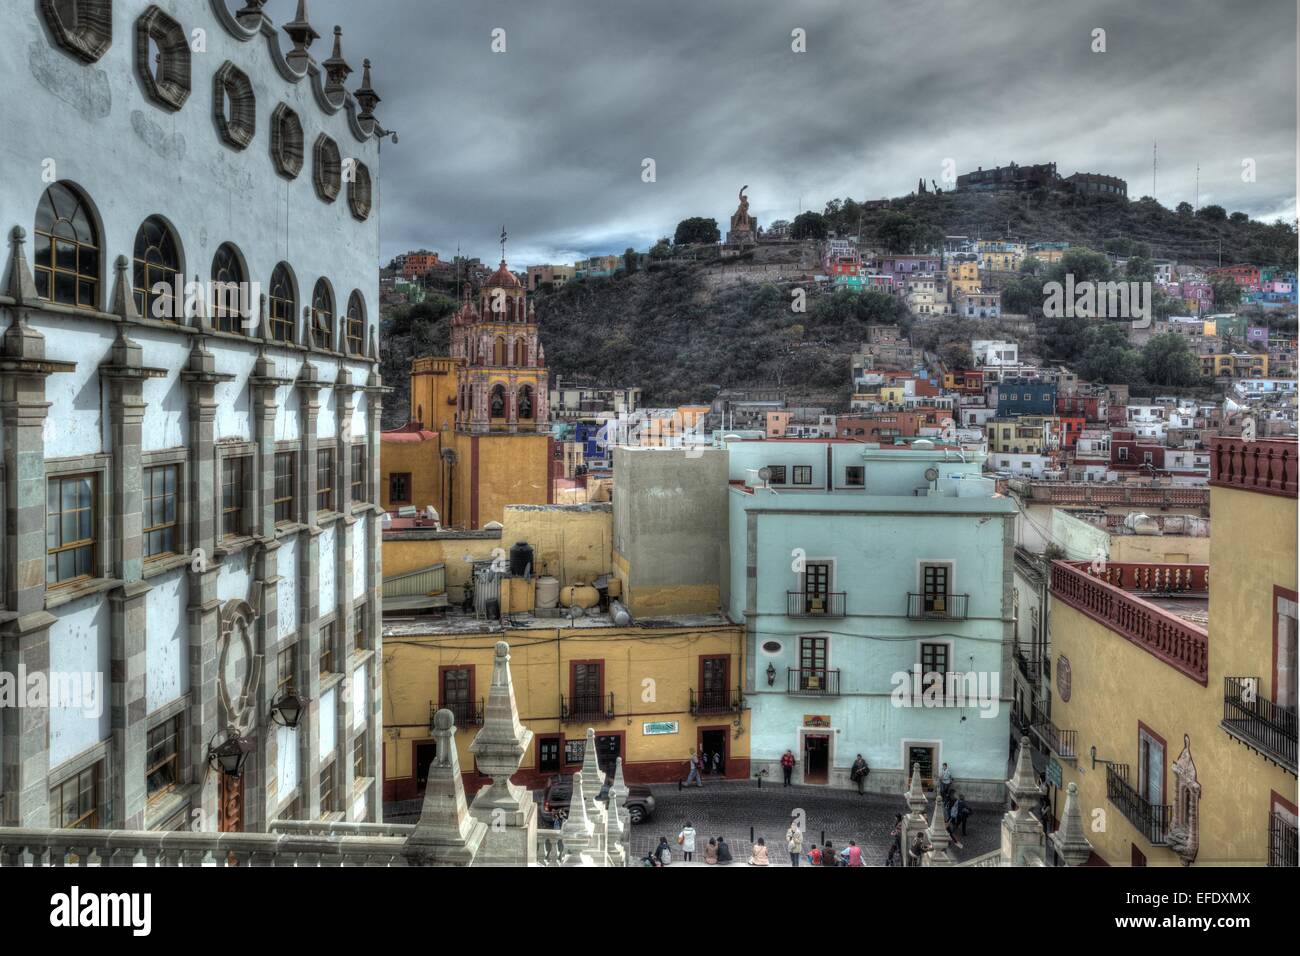 View of the town from the University of Guanajuato Stock Photo